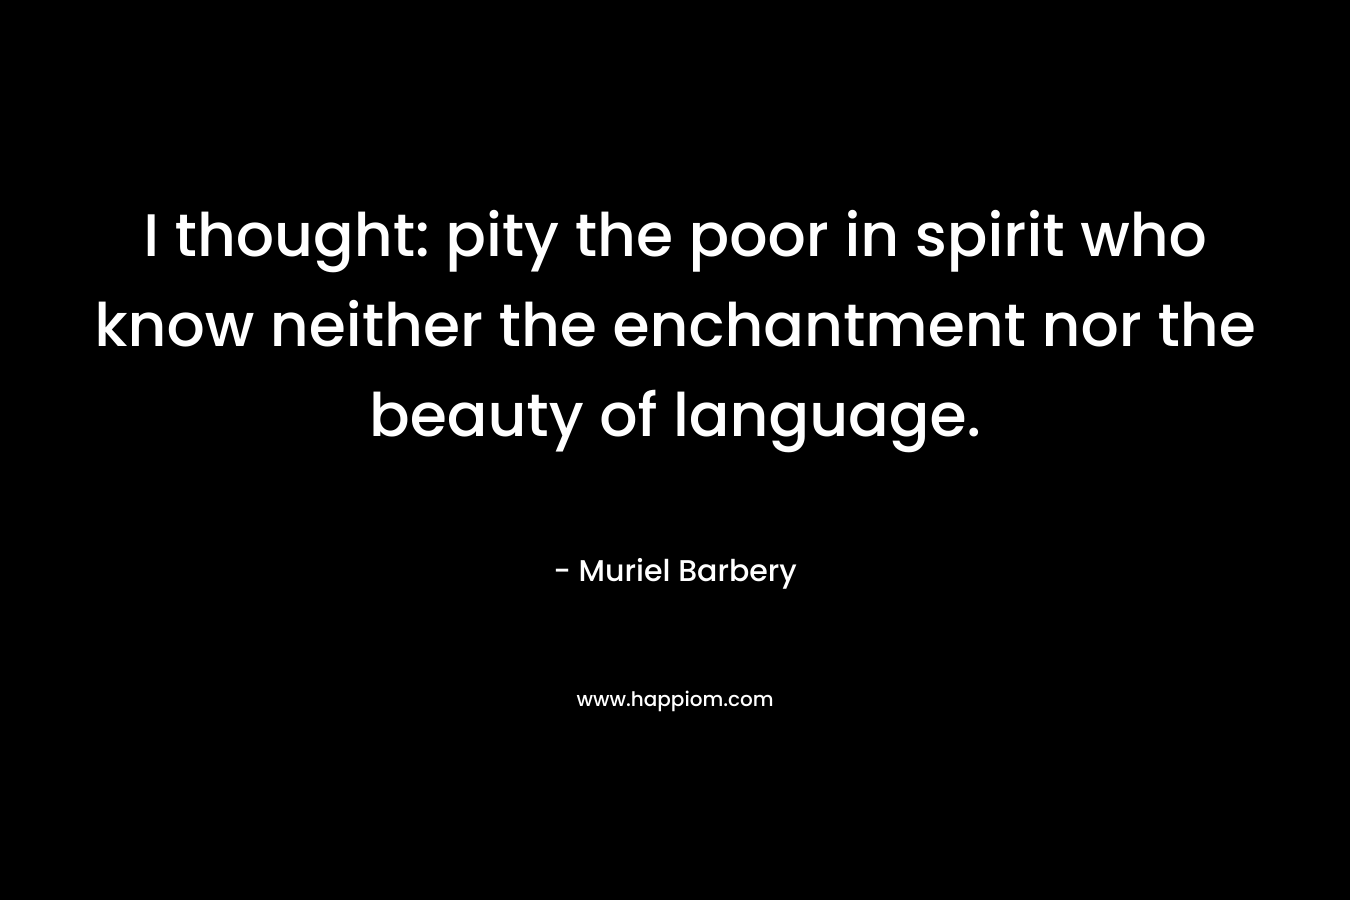 I thought: pity the poor in spirit who know neither the enchantment nor the beauty of language.